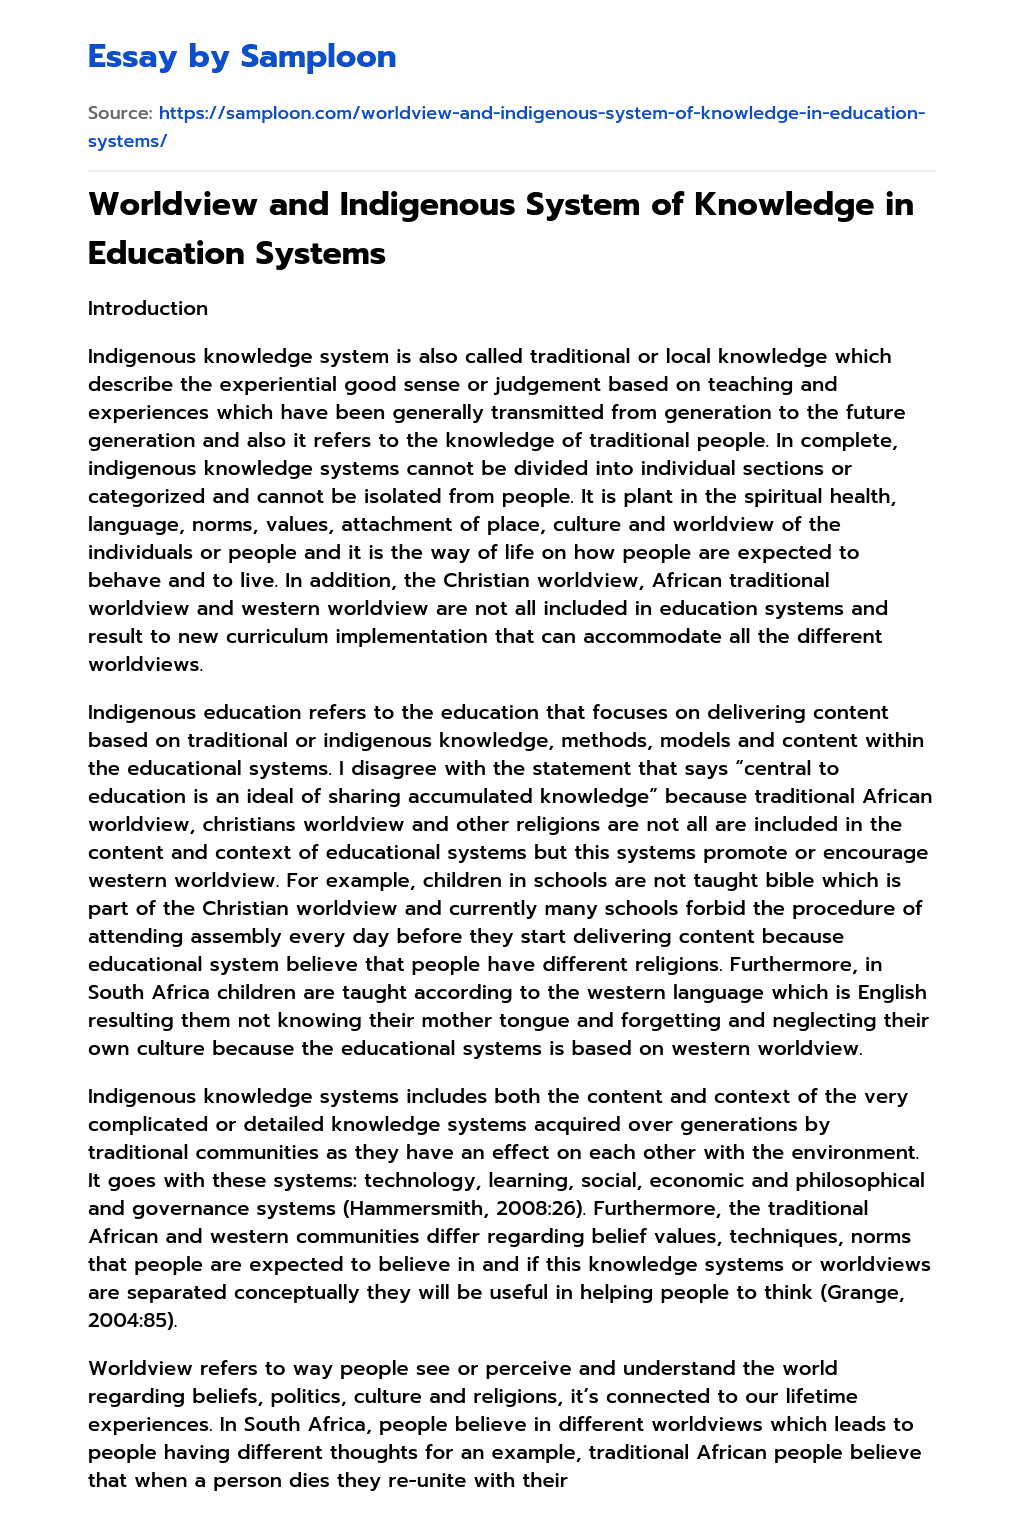 Worldview and Indigenous System of Knowledge in Education Systems essay